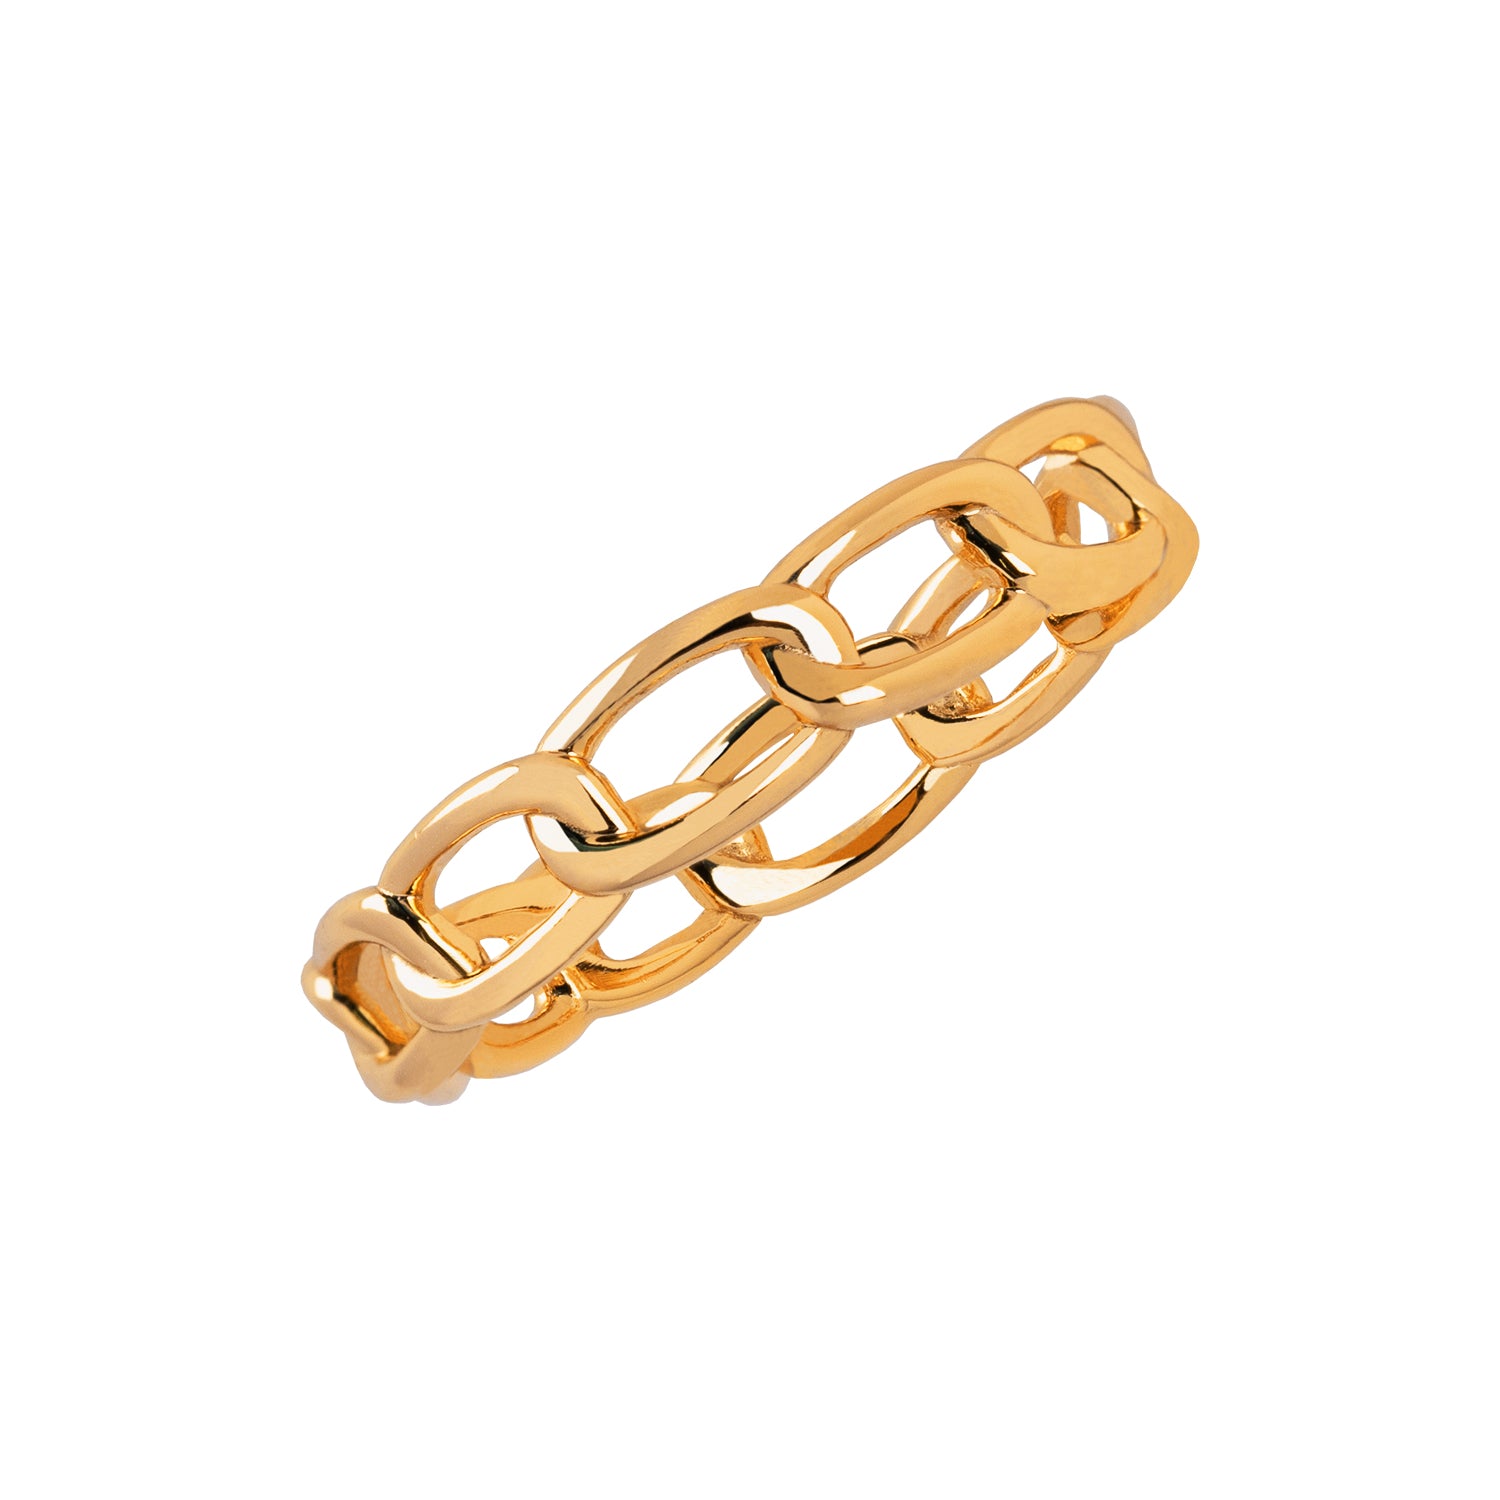 J&CO Jewellery Statement Chain Ring Gold US 8 US 8